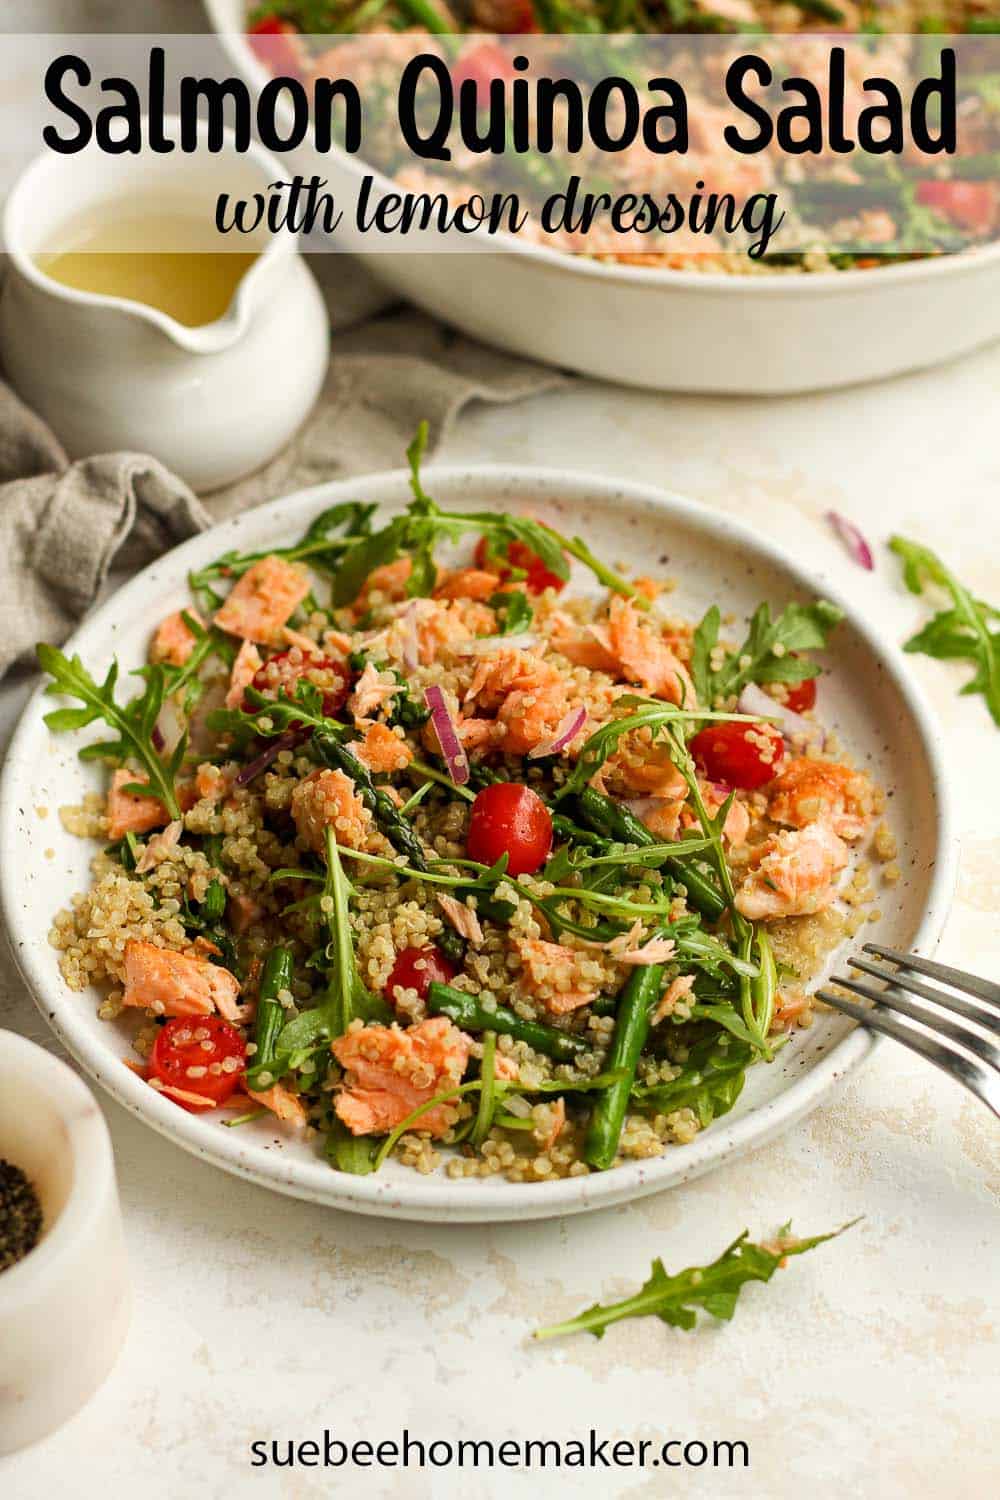 Side view of a plate of salmon quinoa salad, with a jar of lemon dressing.